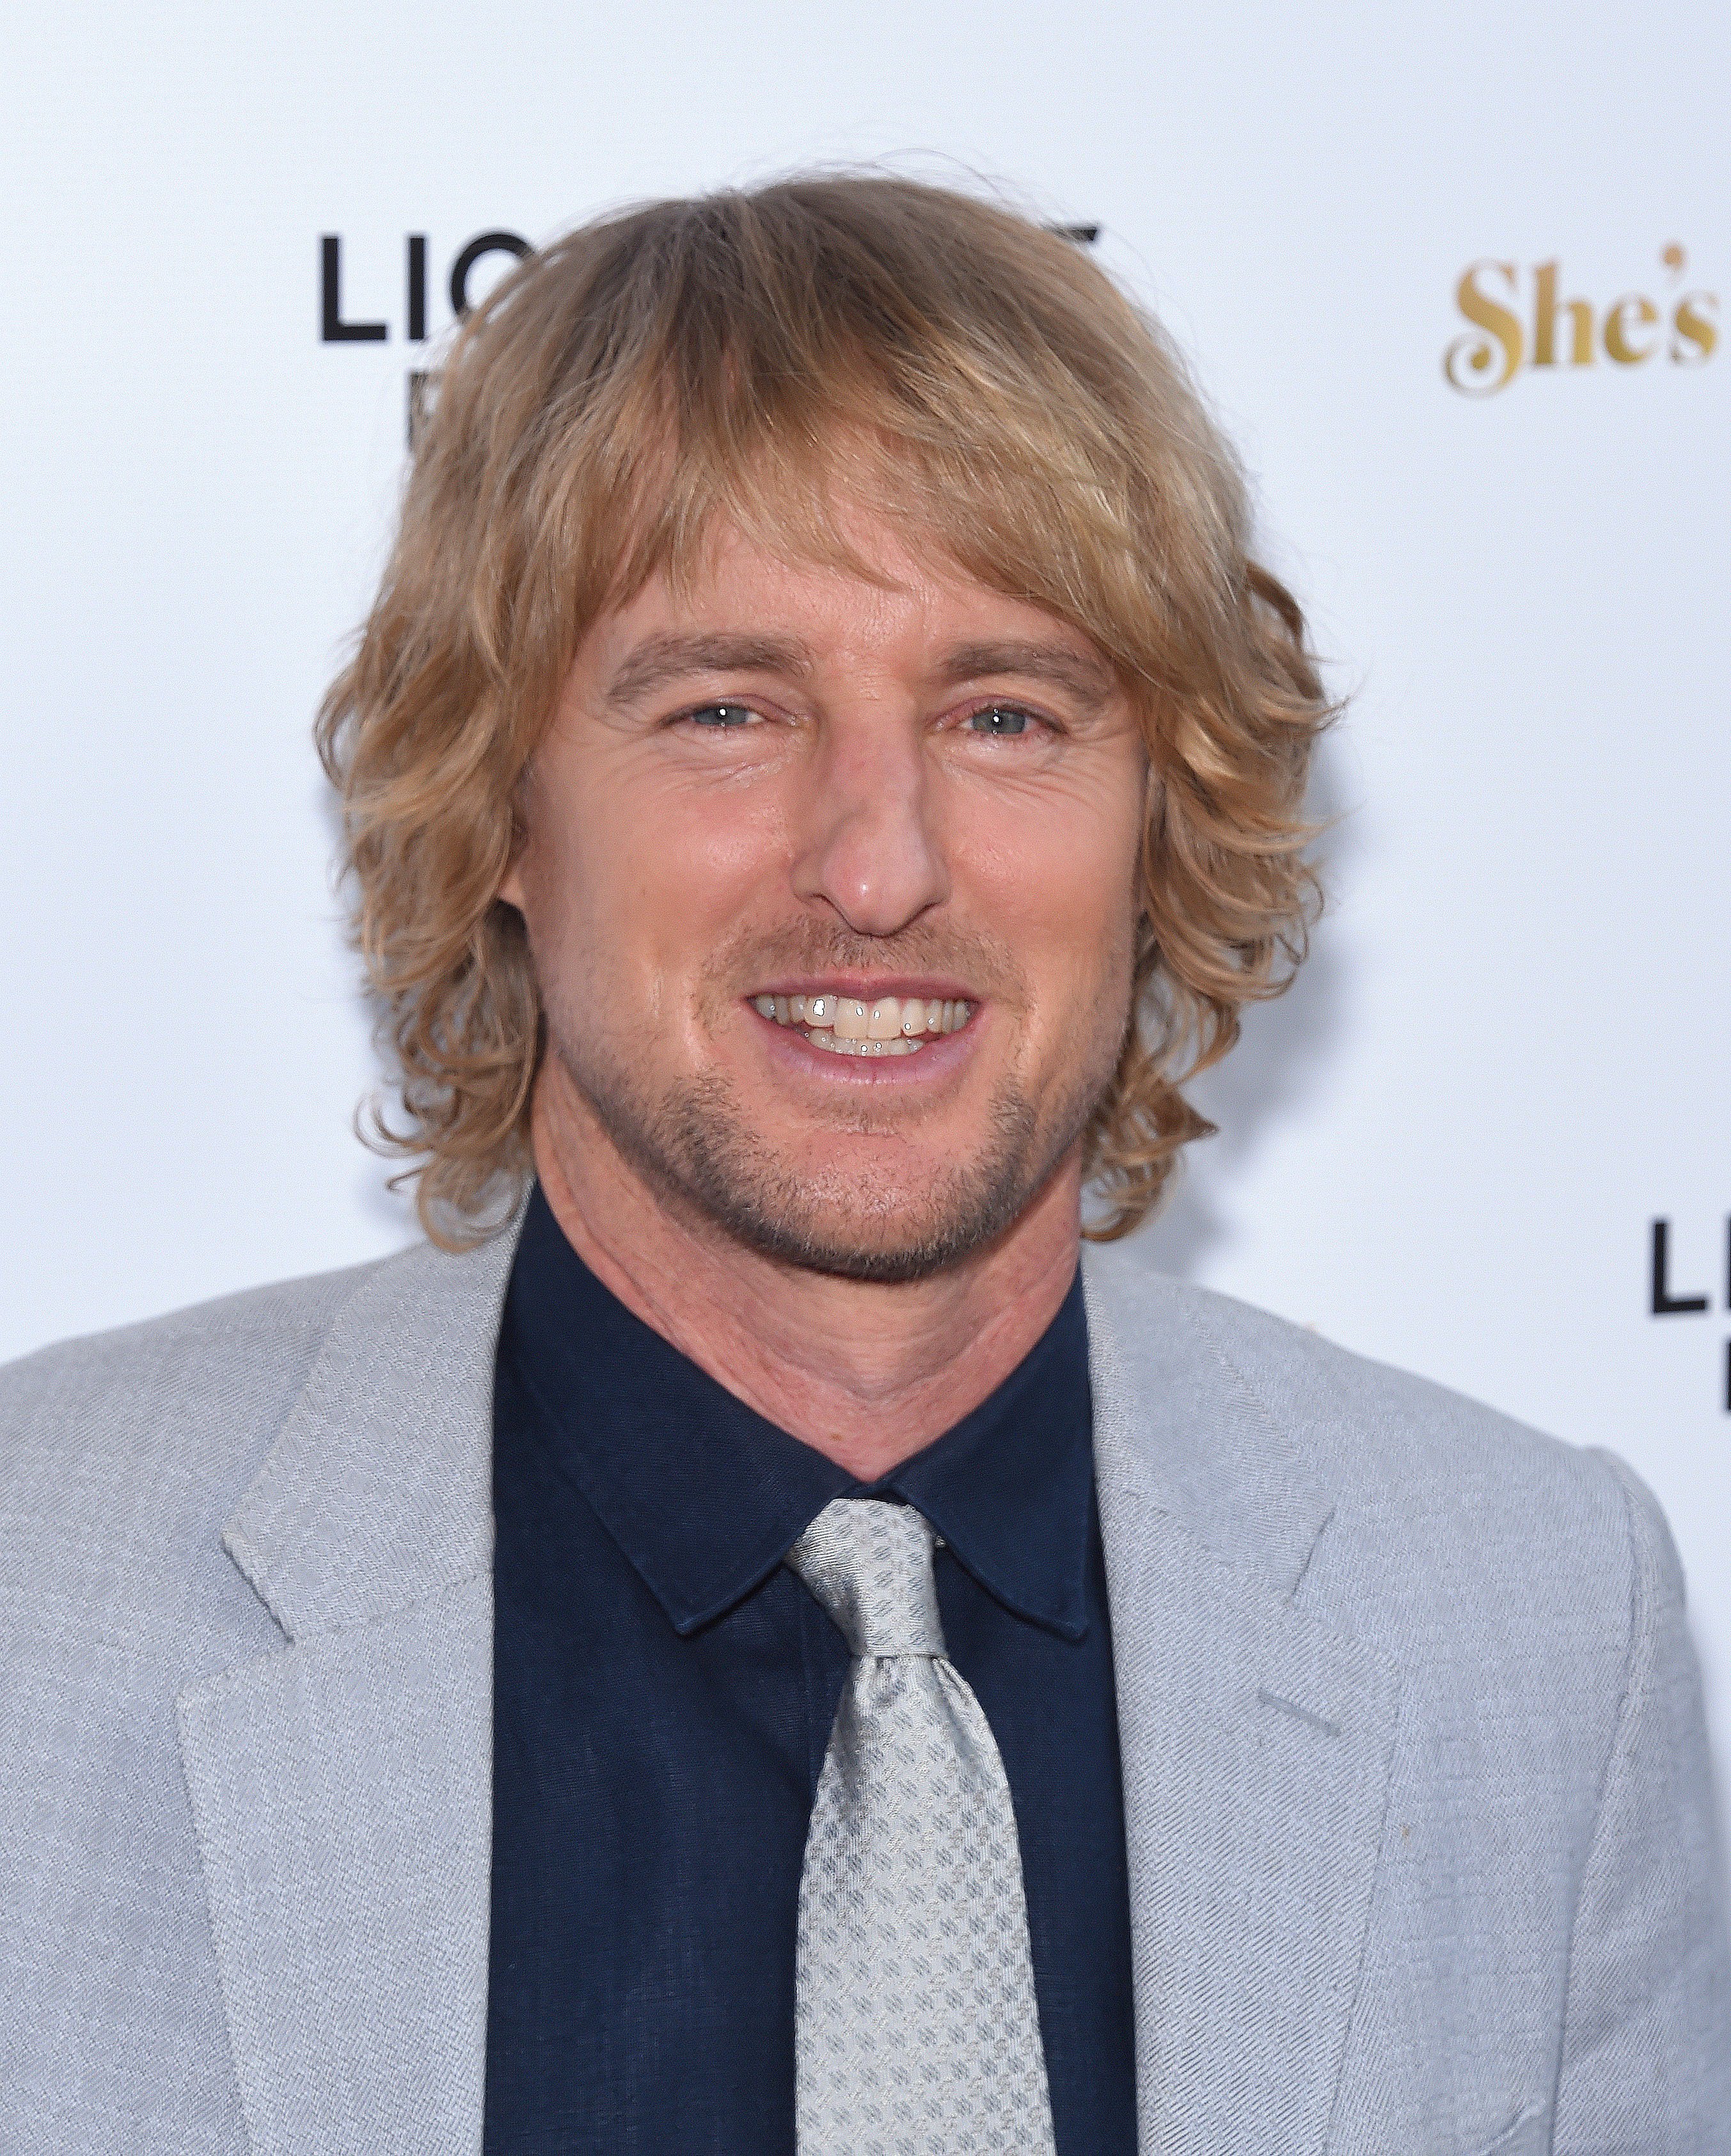 Owen Wilson attends the premiere of "She's Funny That Way" in Los Angeles, Calfornia on August 19, 2015 | Photo: Getty Images